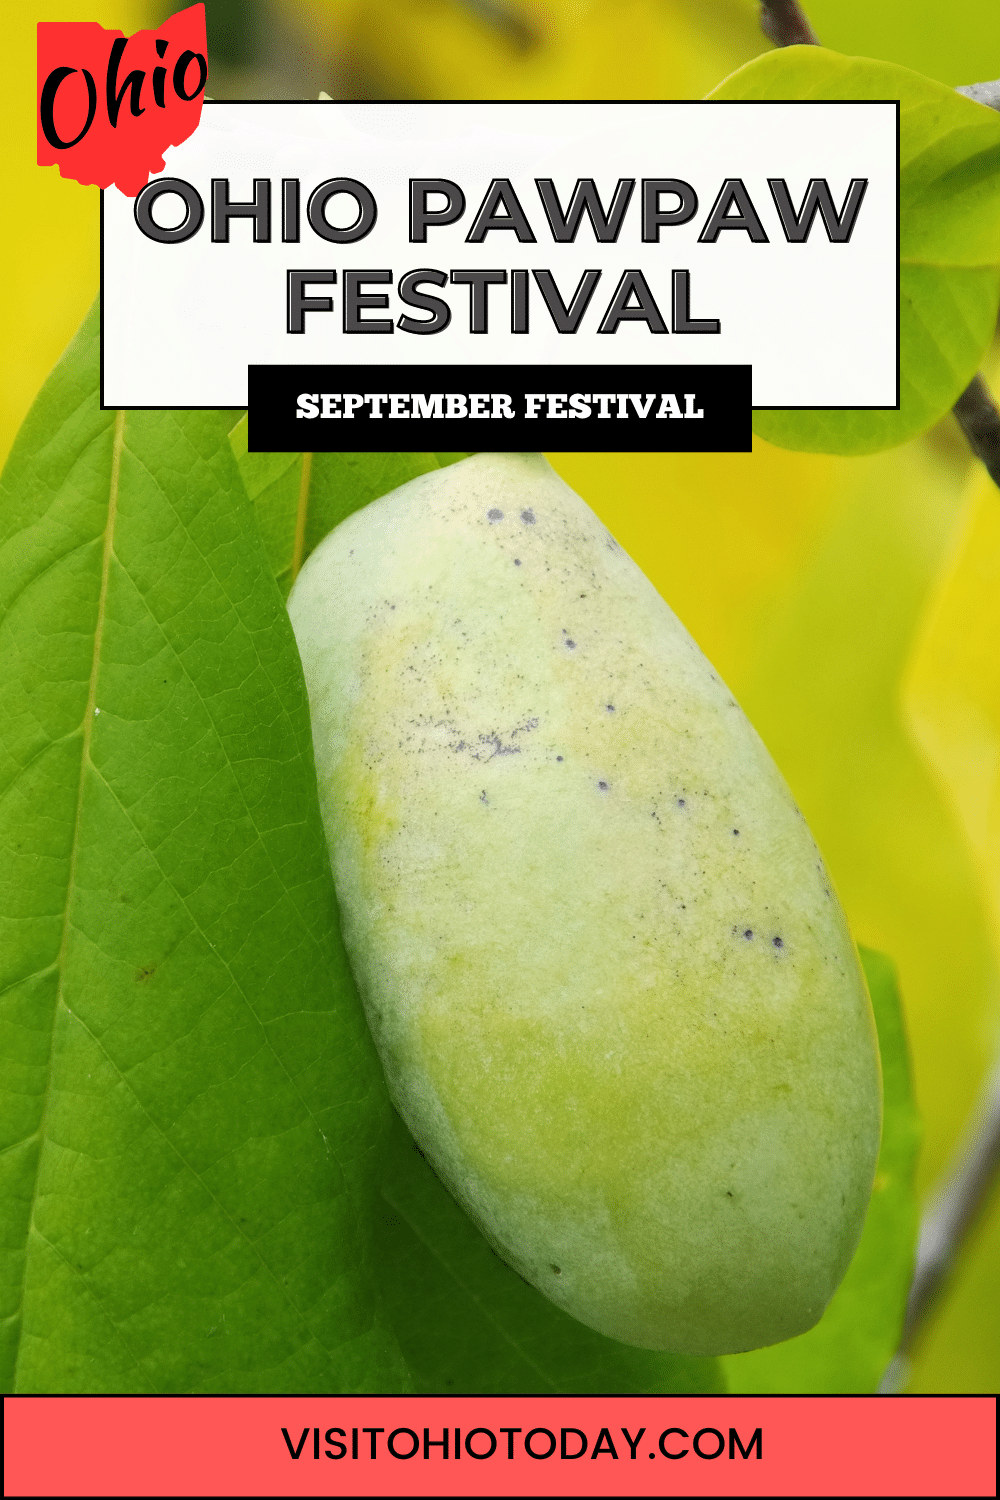 The Ohio Pawpaw Festival, scheduled for September 15 to 17, 2023, celebrates the native tree fruit with pawpaw-inspired food and drinks.